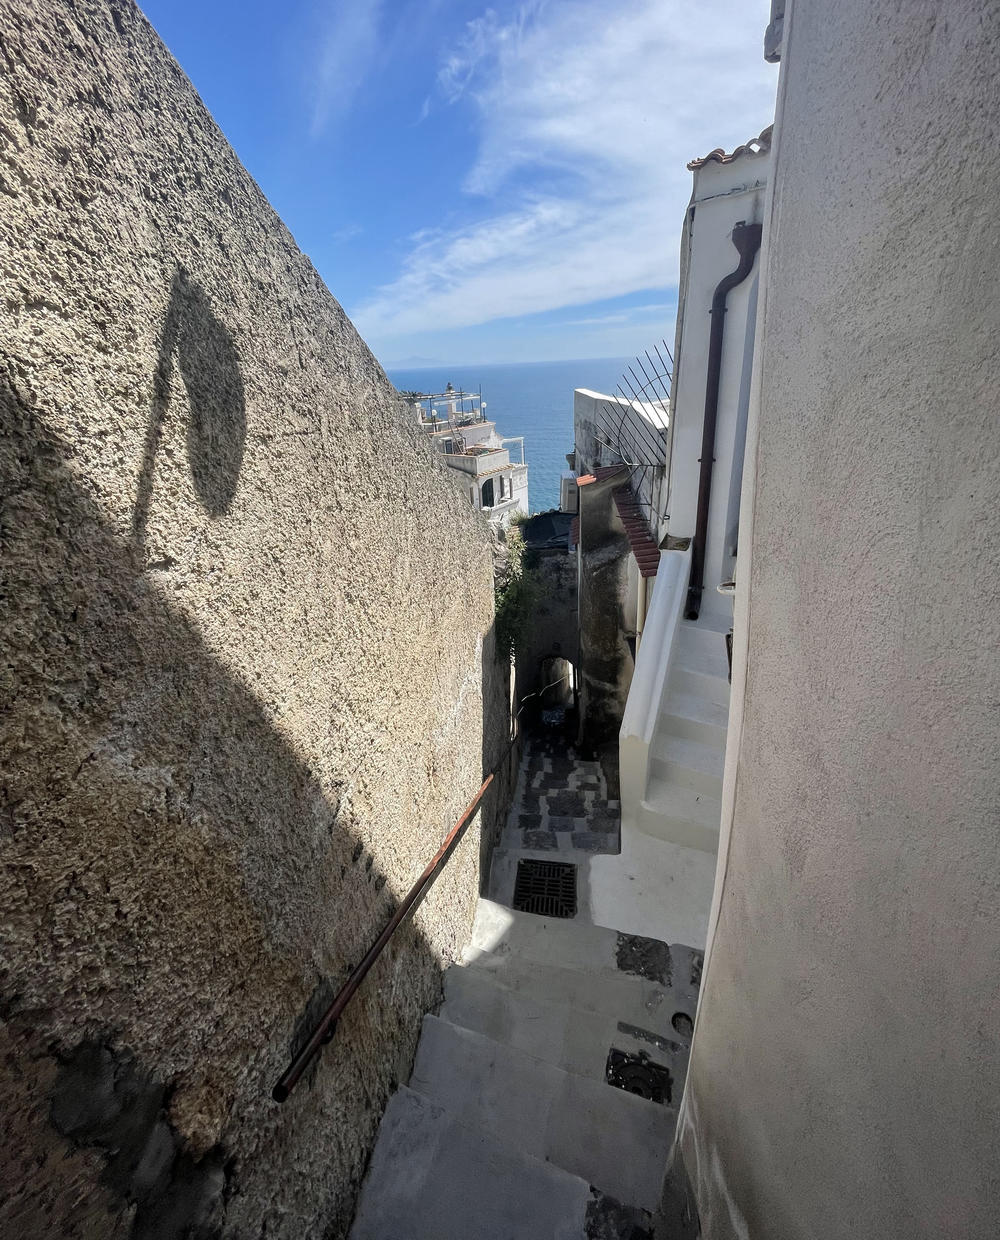 The stairway up to Lauren's accommodations in Amalfi.